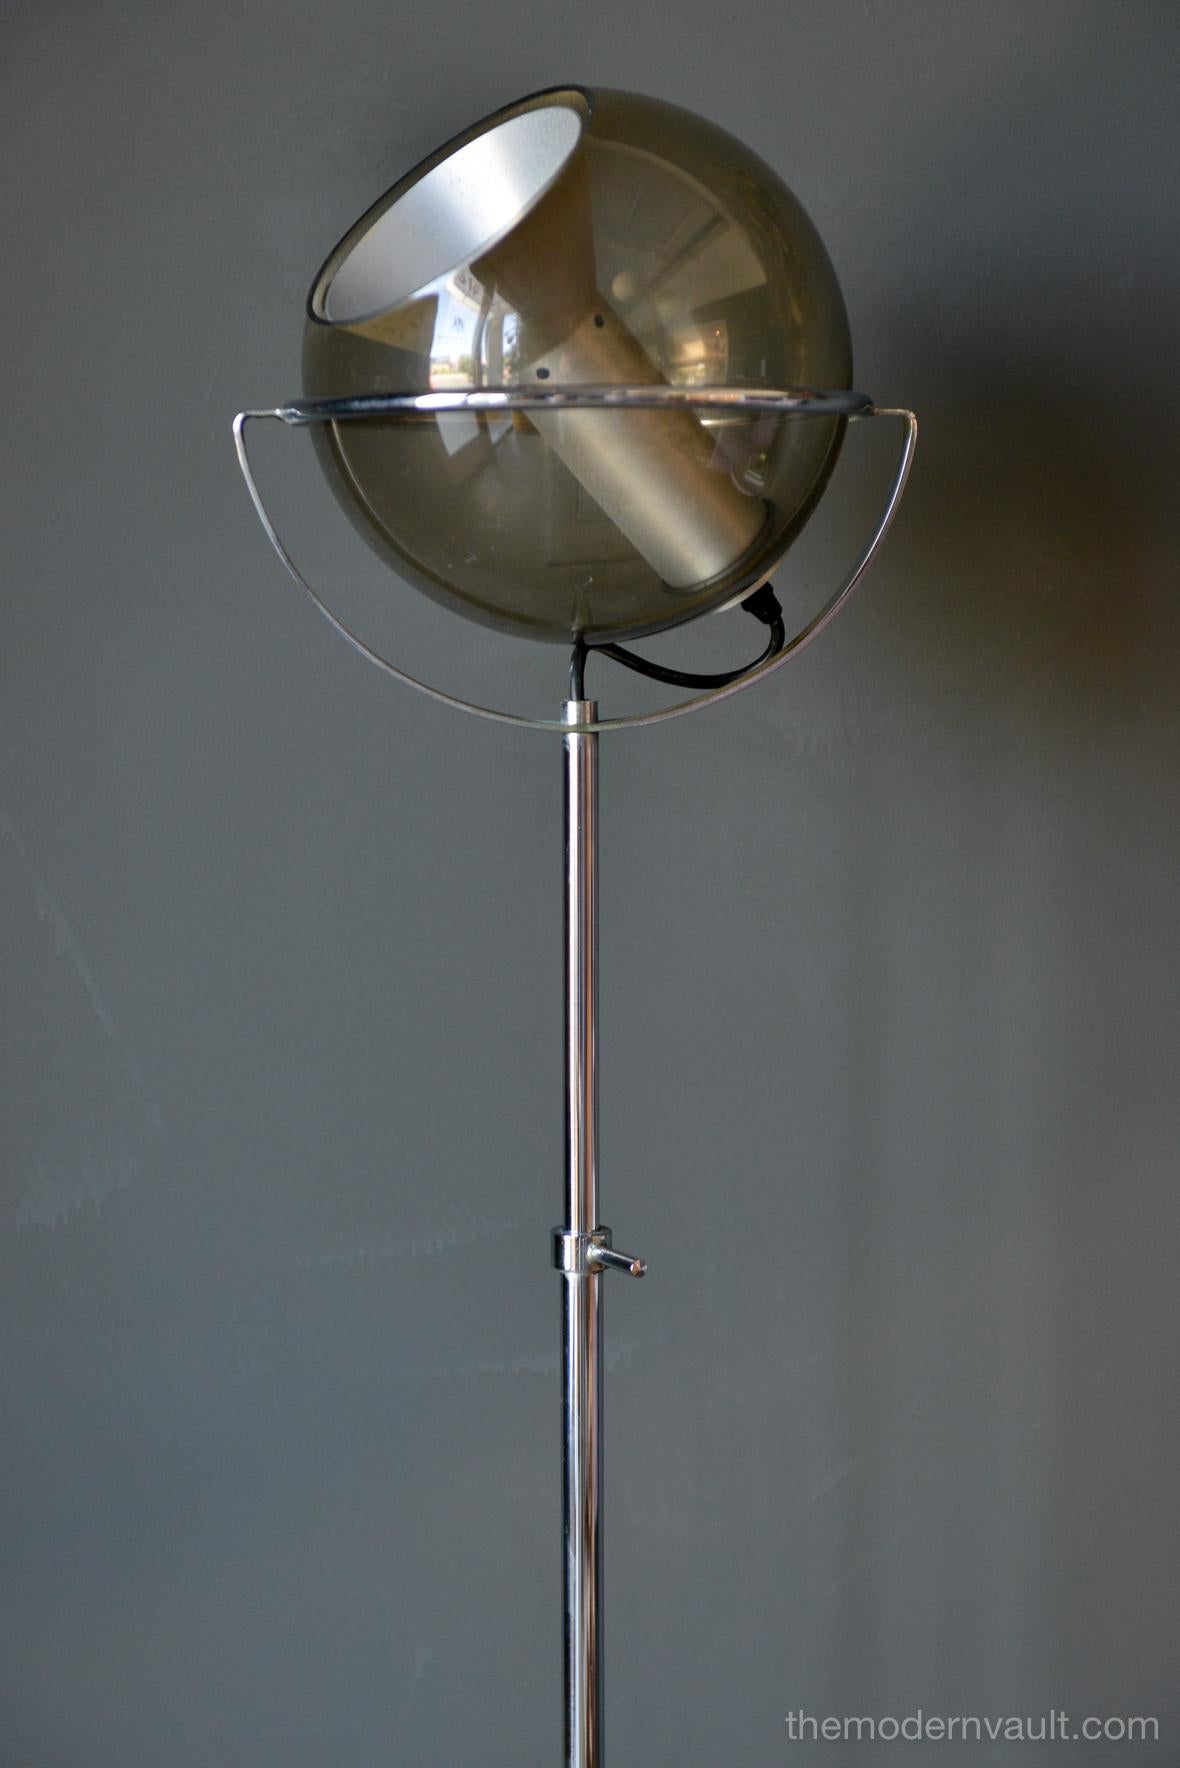 Globe floor lamp by Frank Ligtelijn for RAAK, circa 1961. Smoked glass globe on an adjustable chrome stand. Original 3 star iron base and foot switch with original wiring. Chrome is in very good condition as well as the glass globe. Floating glass